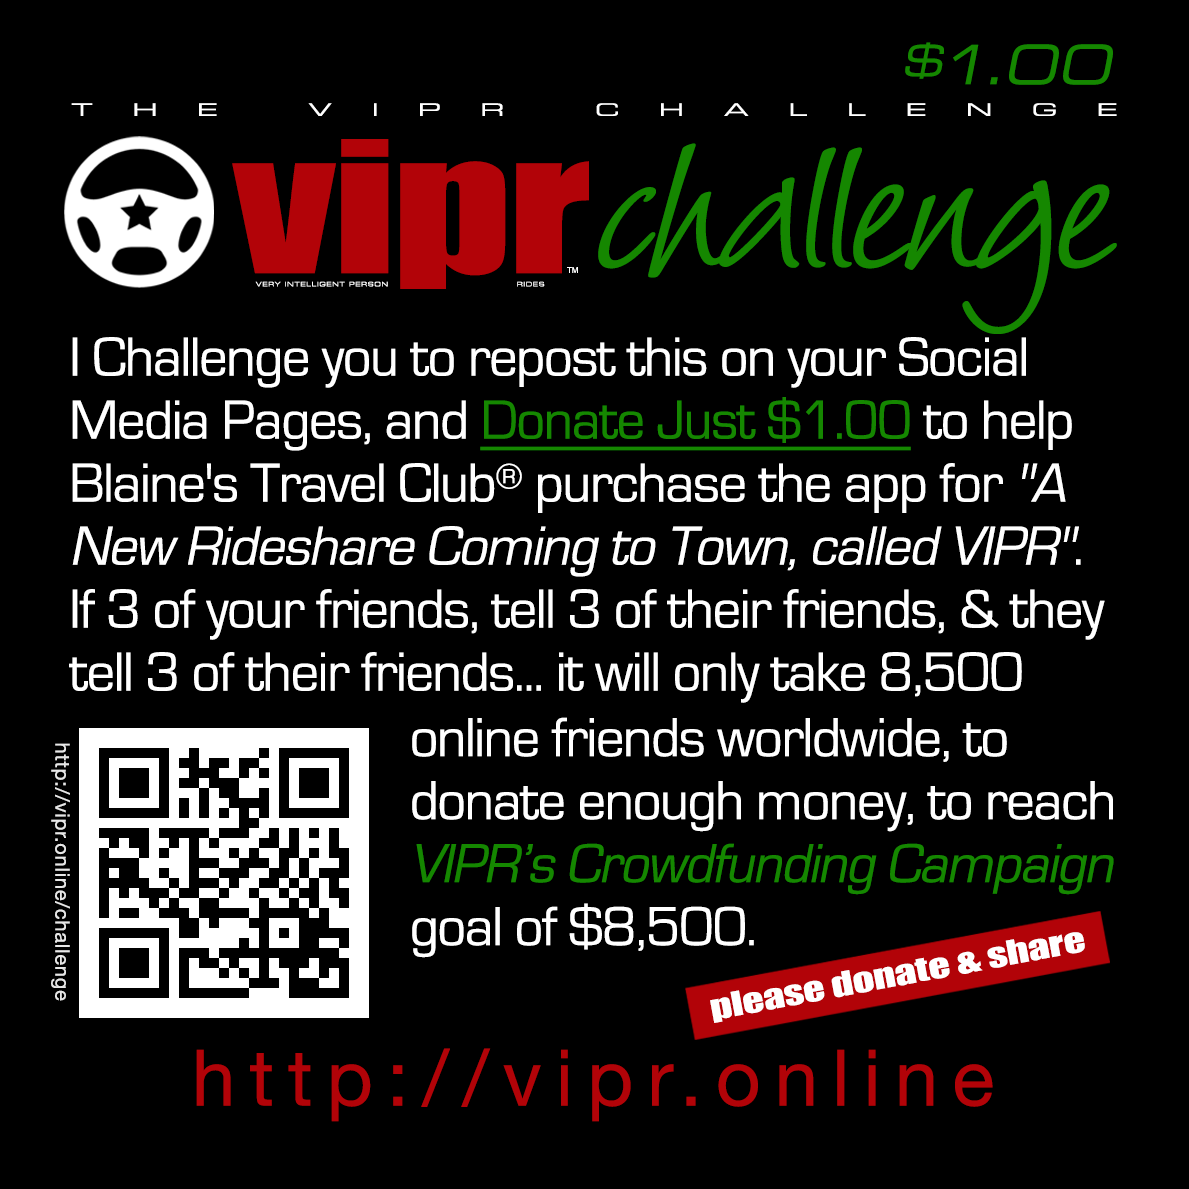 THE VIPR CHALLENGE